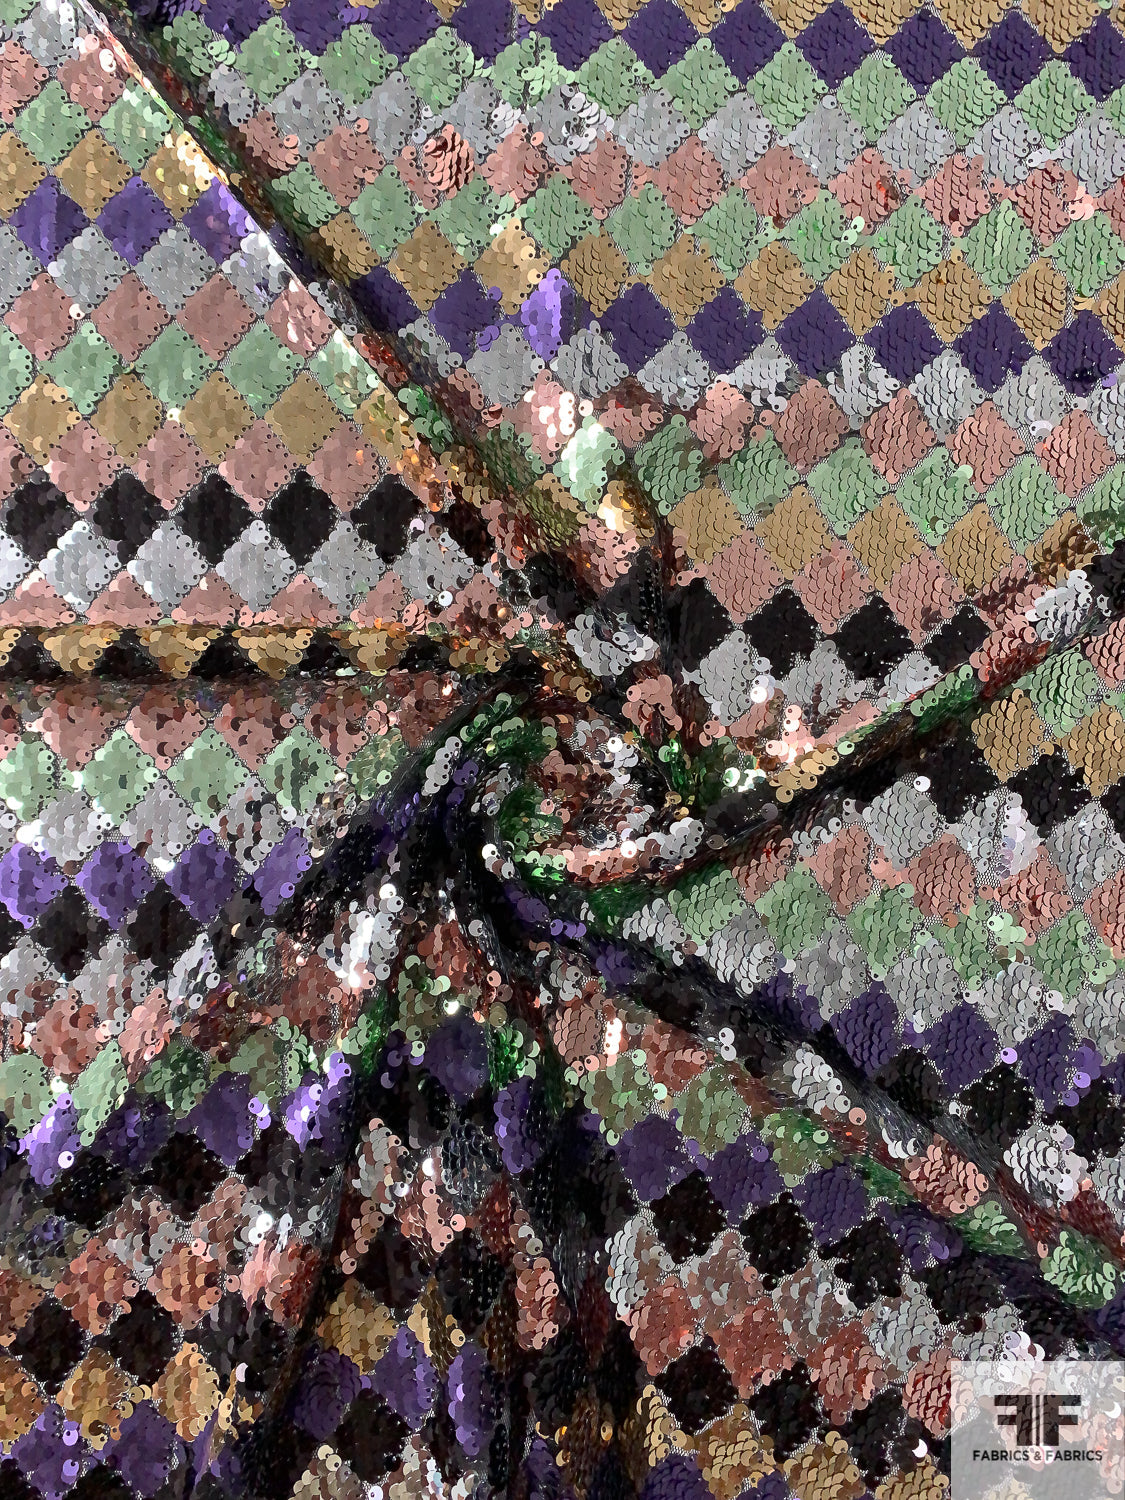 Harlequin Pattern Sequins on Netting - Multicolor